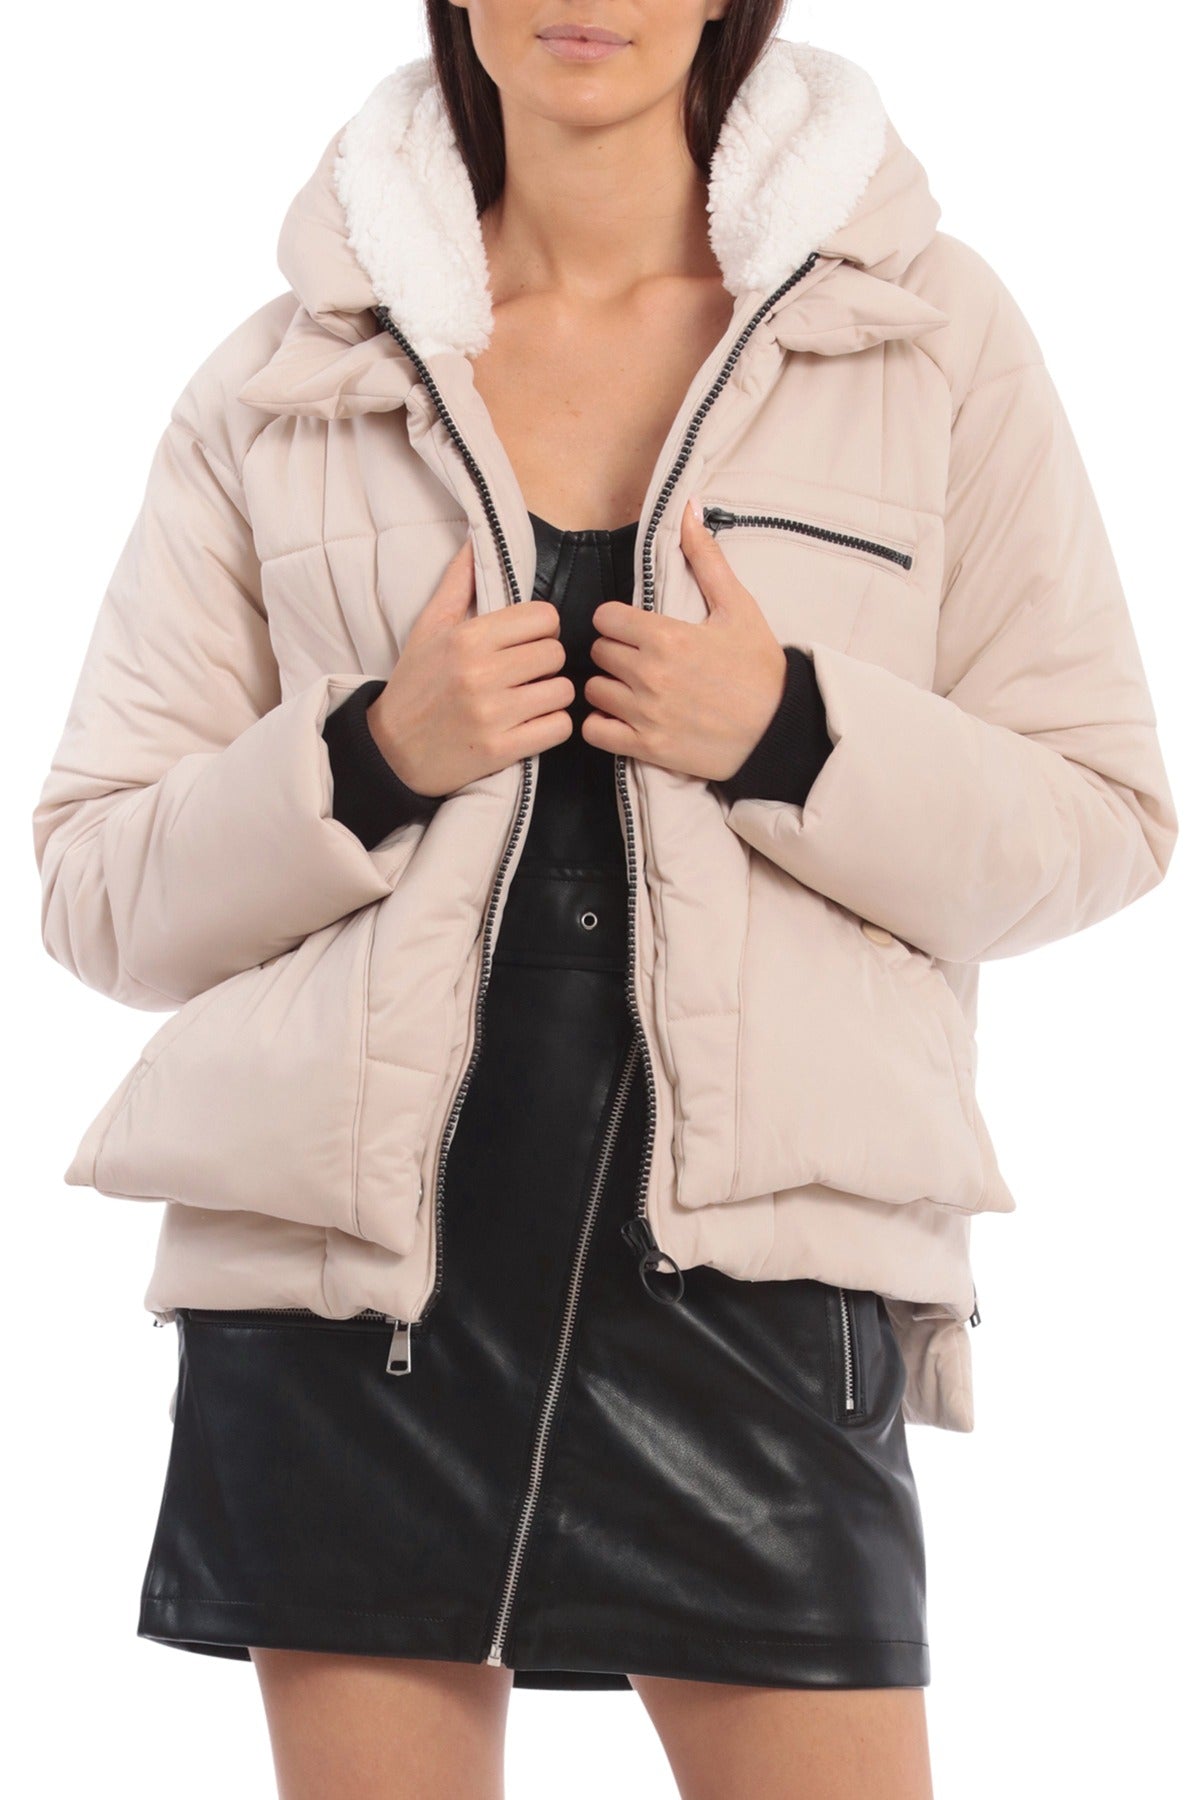 Short Utility Puffer Jacket Outerwear detachable hood thermapuff faux down interior buff beige 